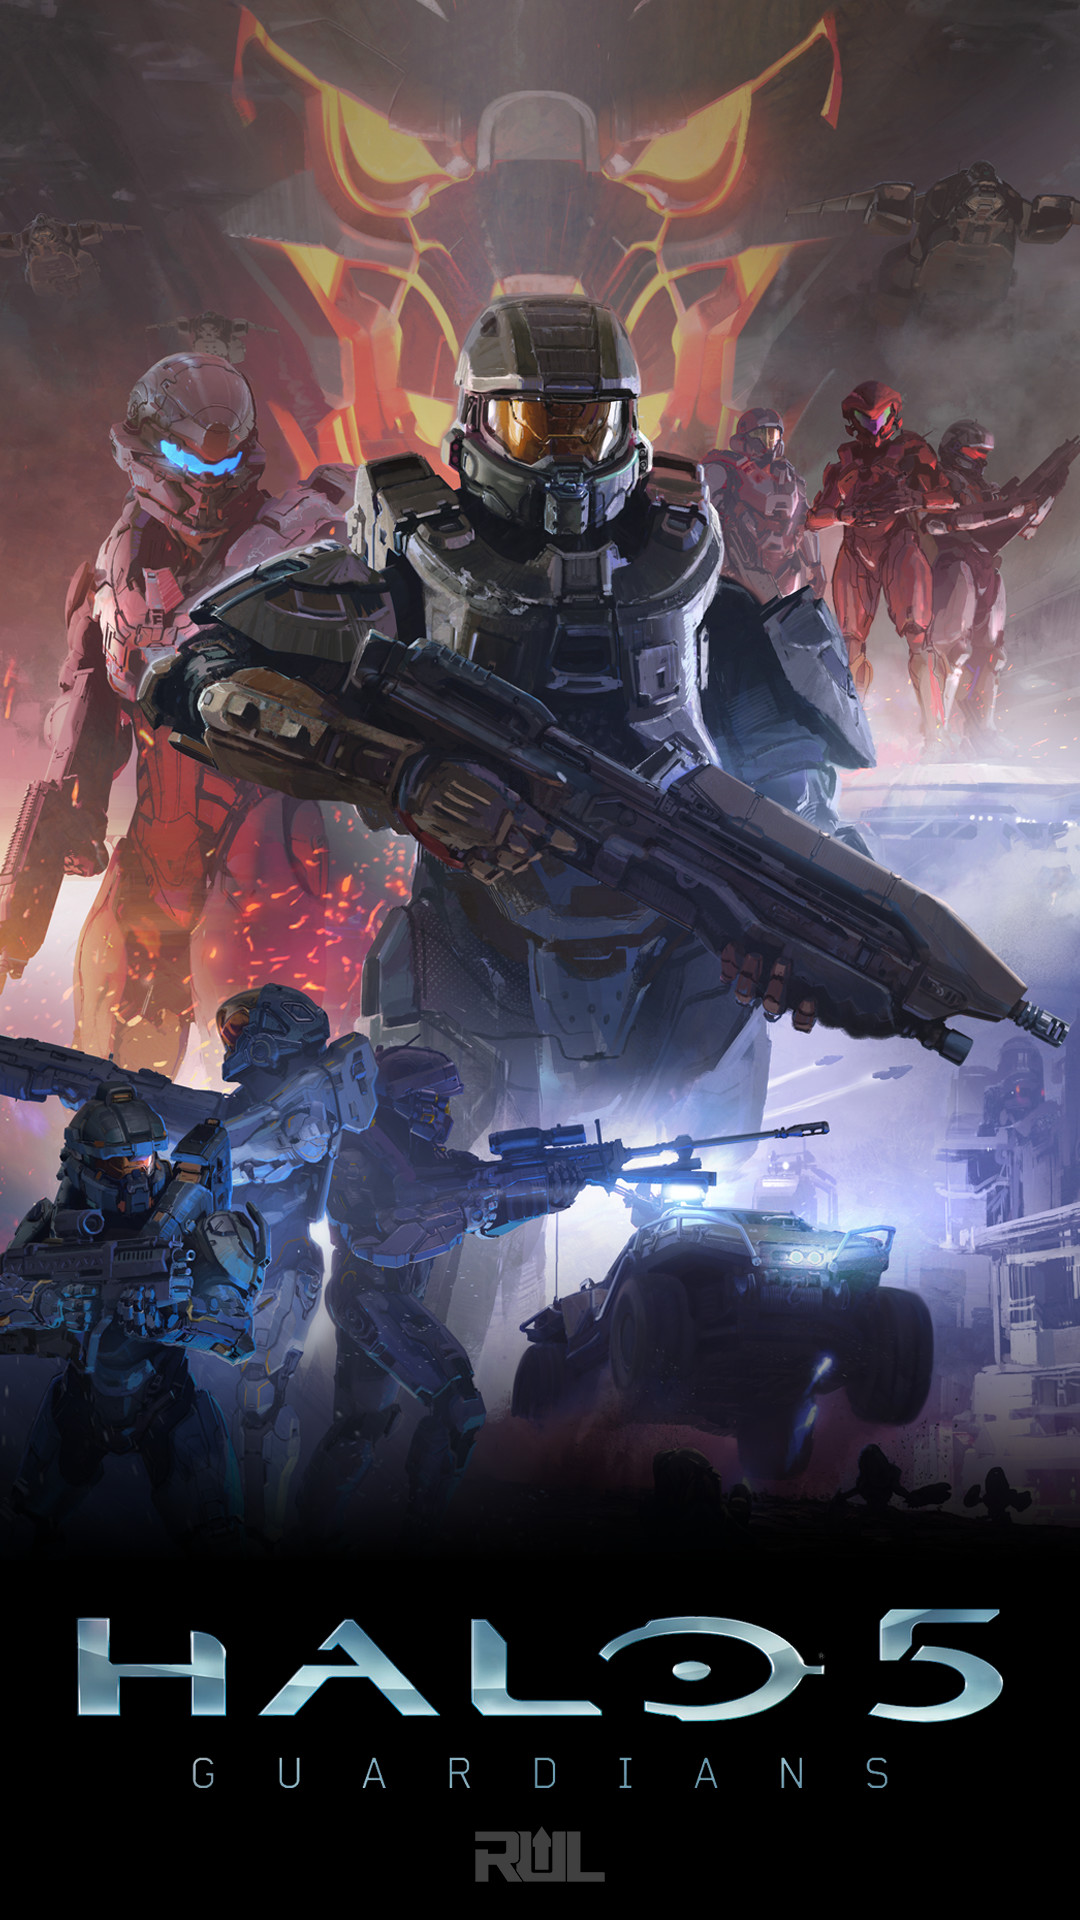 halo phone wallpaper,action adventure game,movie,poster,fictional character,cg artwork